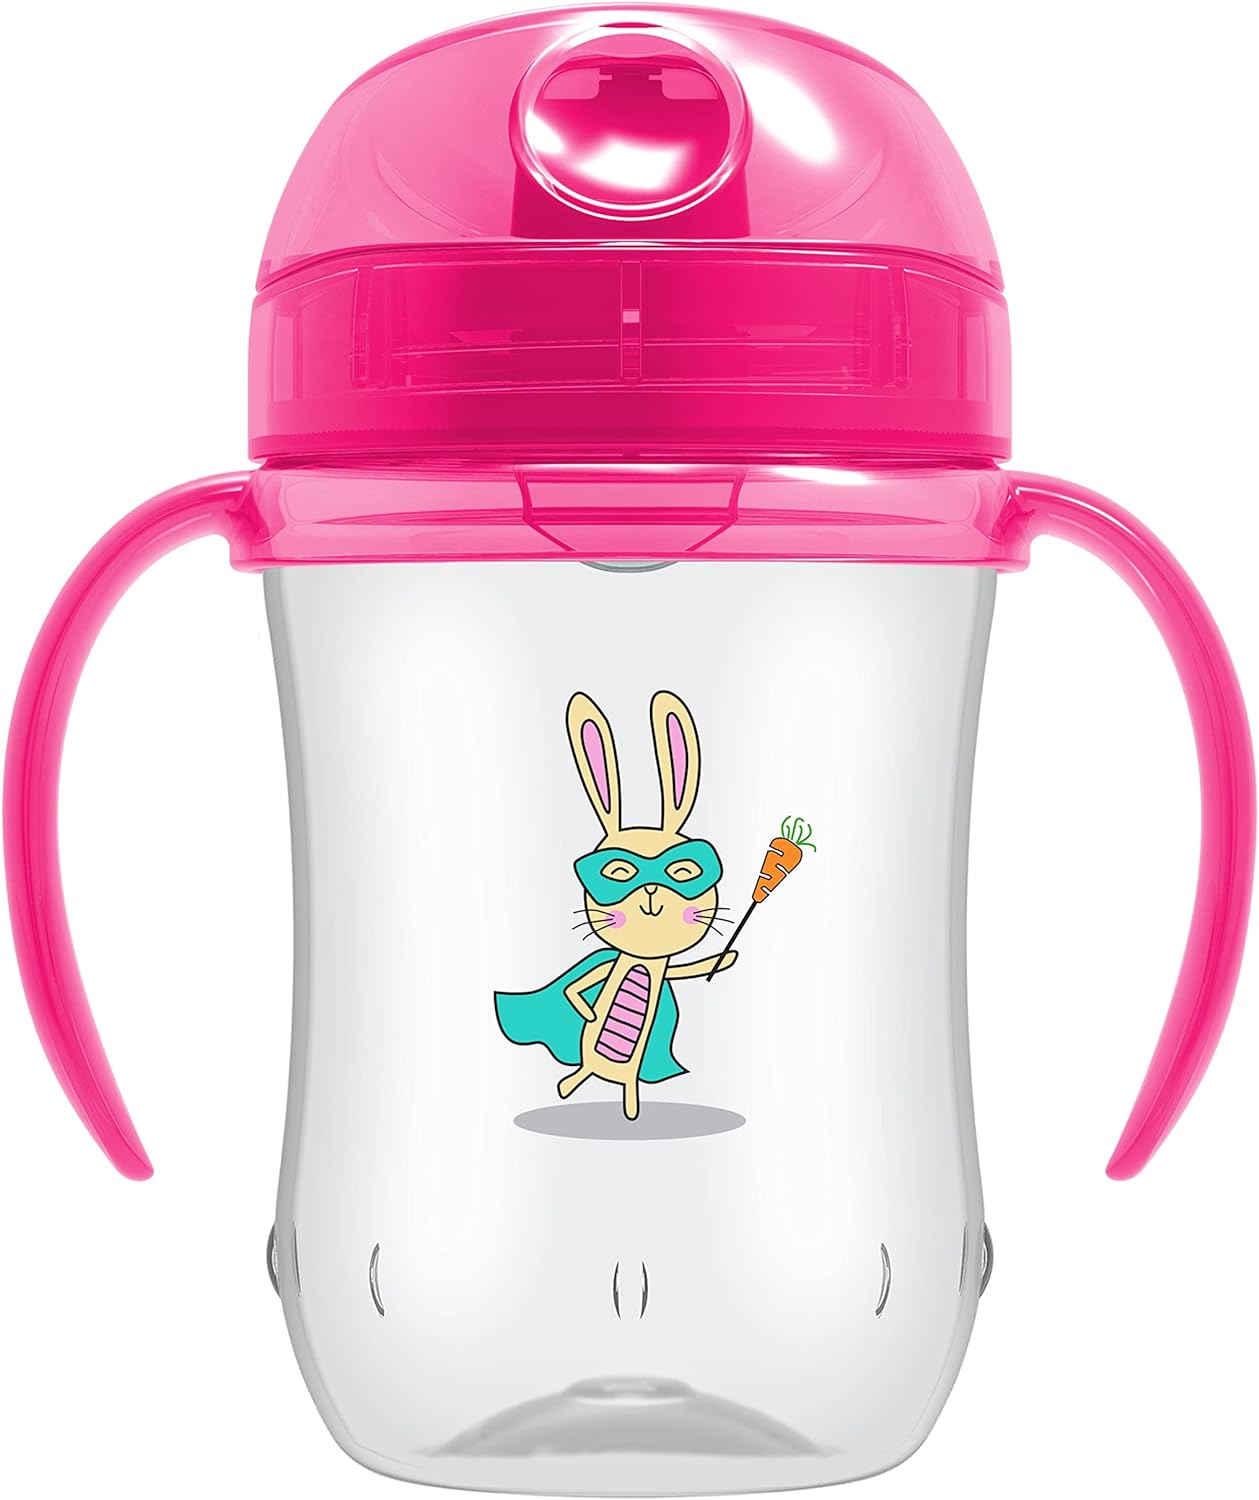 9 oz Soft-Spout Toddler Cup-Pink